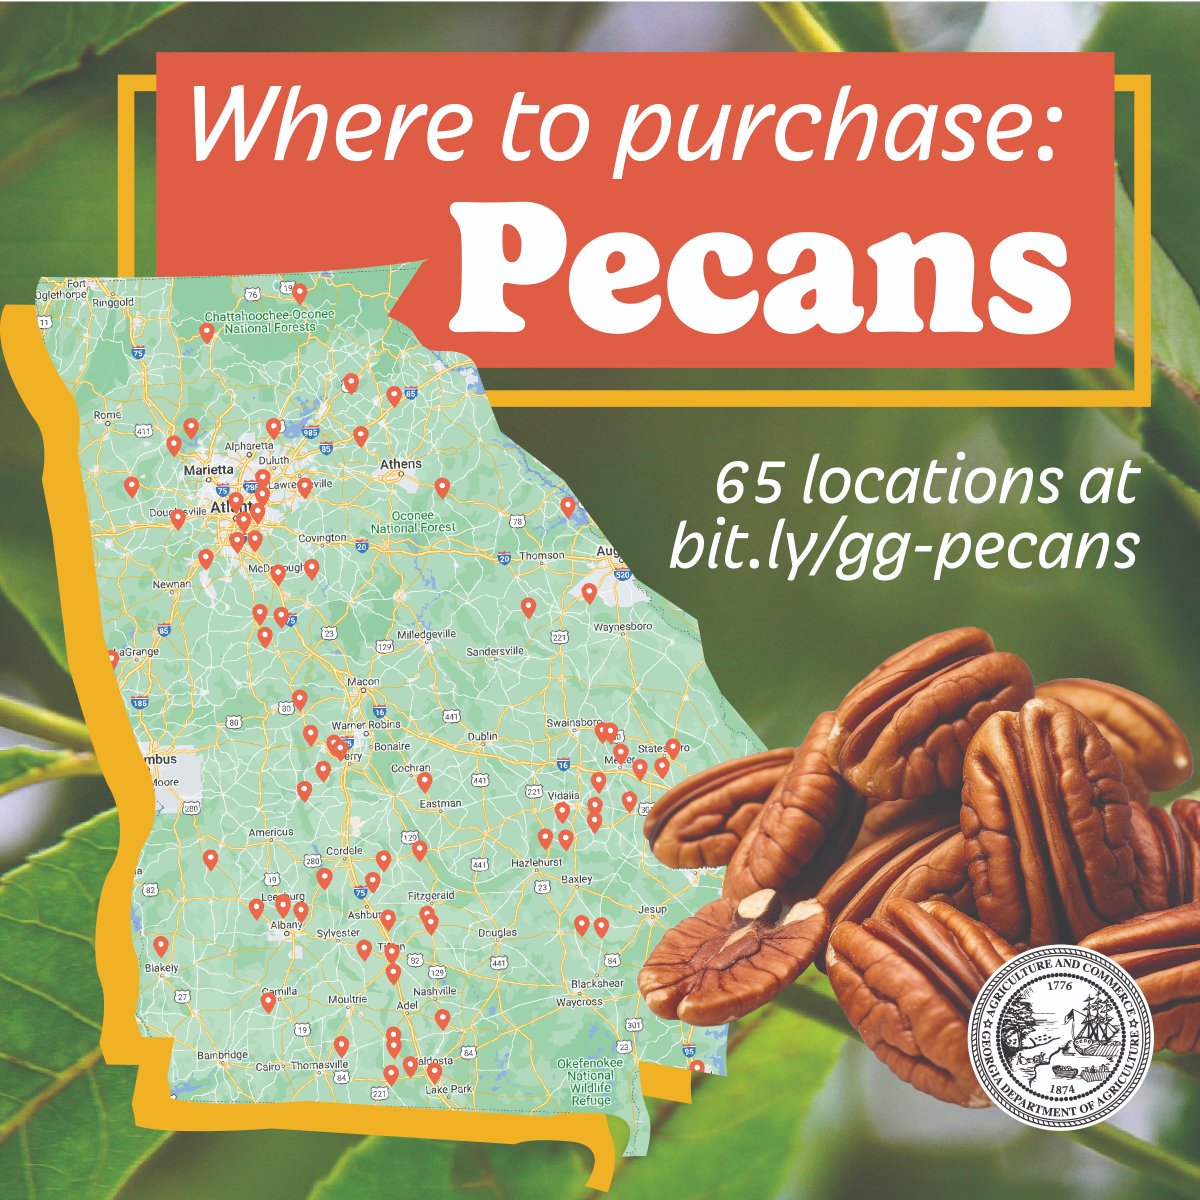 As #NationalPecanMonth wraps up, we're excited to share over 60 #Georgia businesses where you can find the freshest Georgia Grown pecans! Don't miss out—discover your next favorite treat today! bit.ly/gg-pecans #SmallBusinessWeek #GeorgiaGrown #Pecans #agribusiness